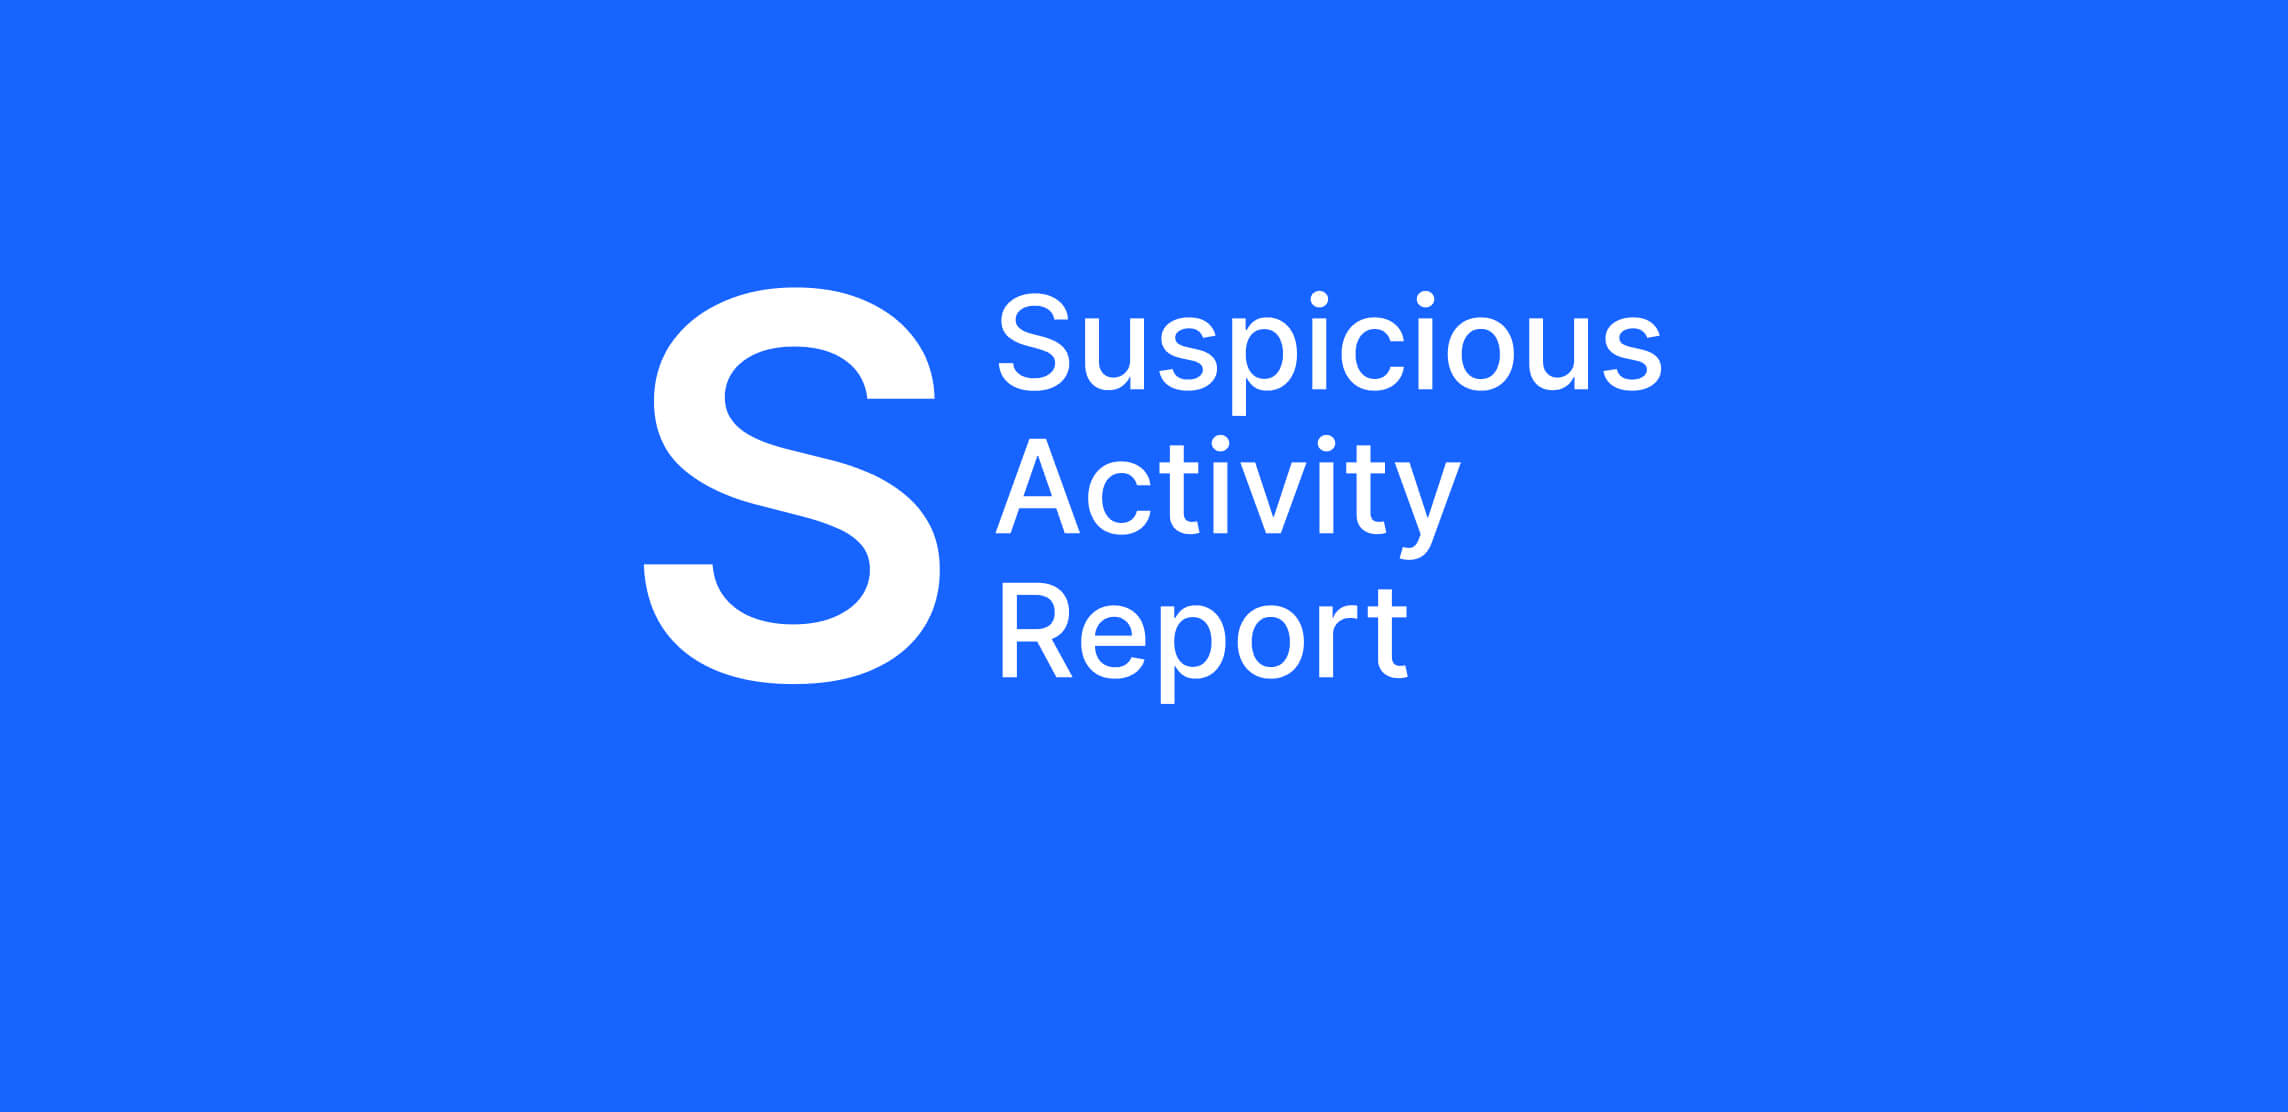  A blue background with white text that reads 'Suspicious Activity Report' in a large 'S' shape.